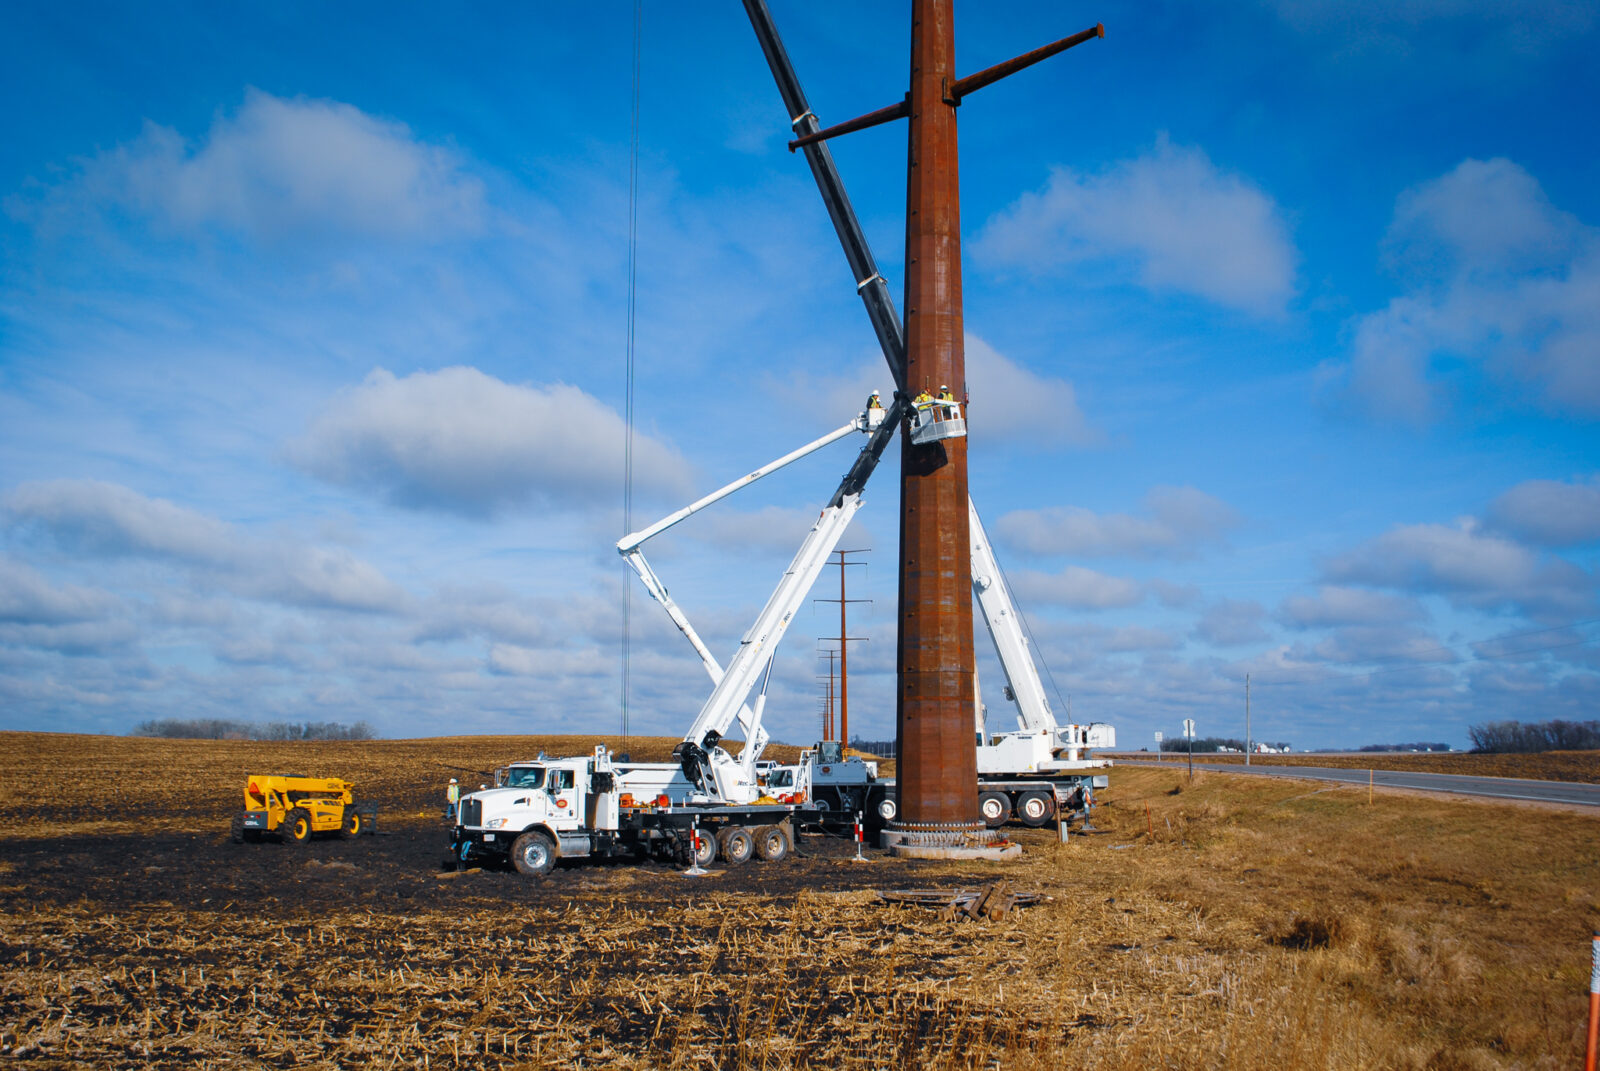 Two white bucket trucks elevate L.E. Myers employees for transmission line work in brown field